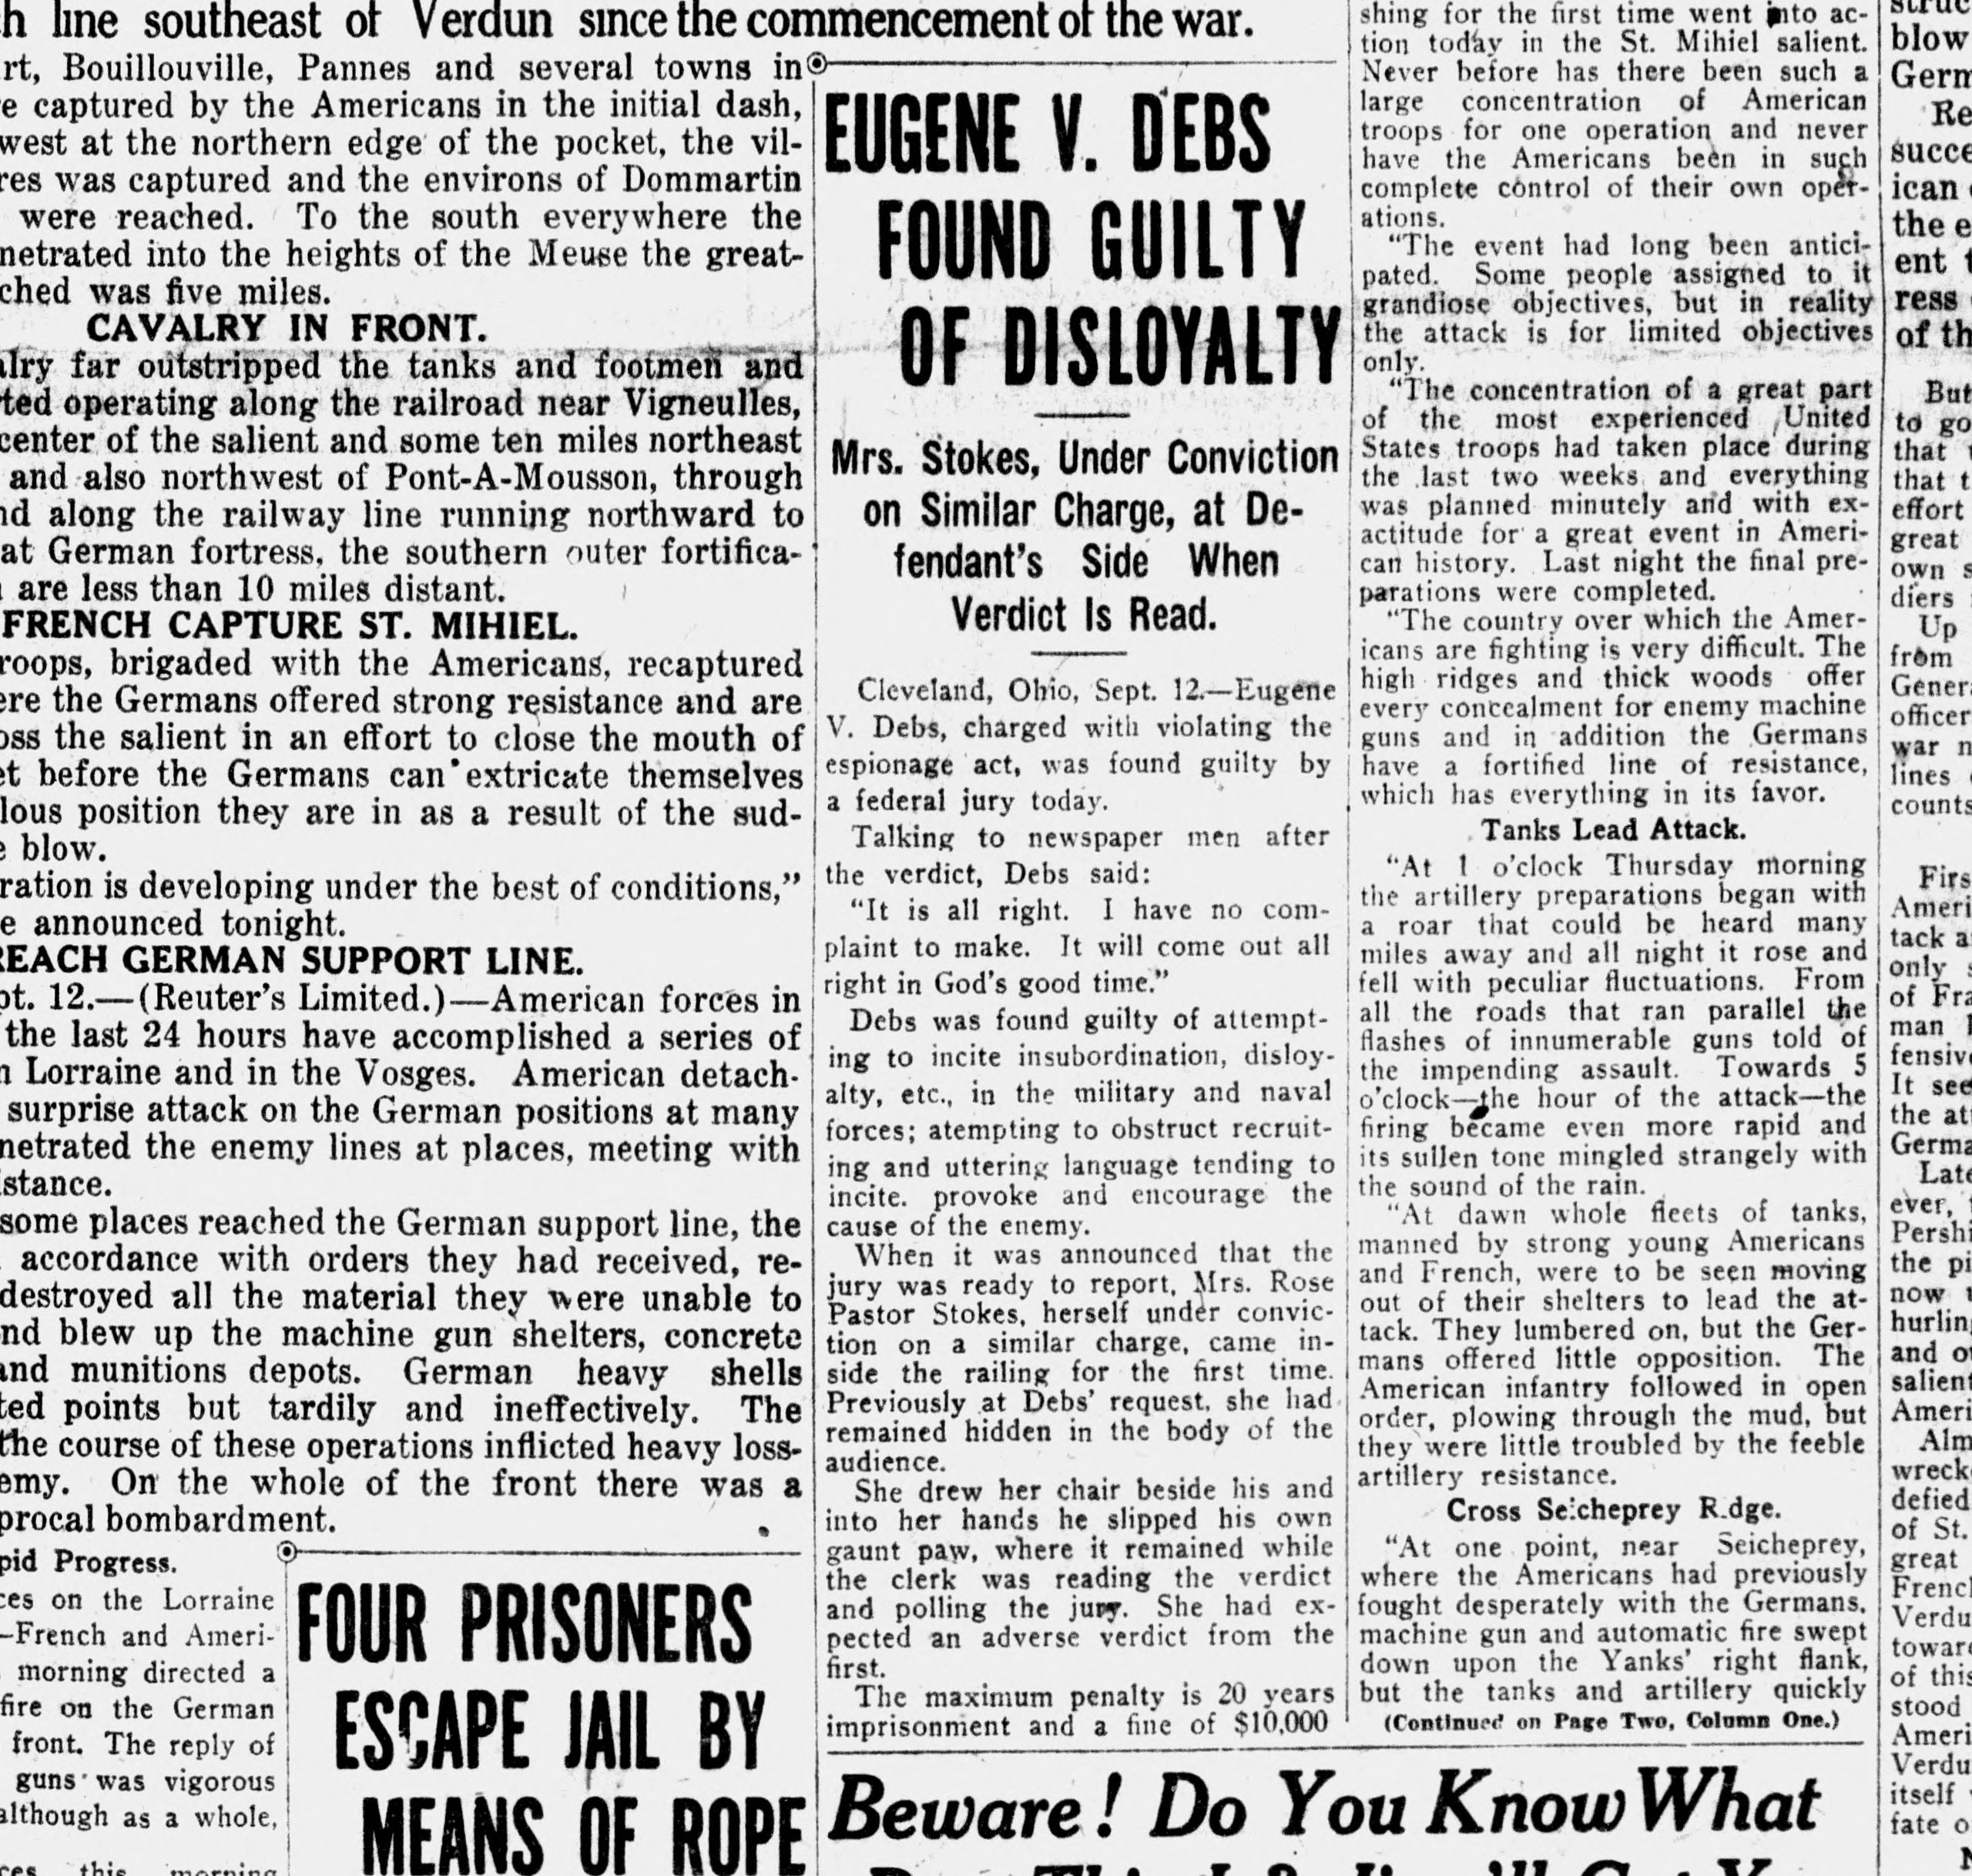 Eugene V. Debs Found Guilty of Disloyalty, Omaha daily bee. (Omaha [Neb.]), 13 Sept. 1918. Chronicling America: Historic American Newspapers. Lib. of Congress. <https://chroniclingamerica.loc.gov/lccn/sn99021999/1918-09-13/ed-1/seq-1/>